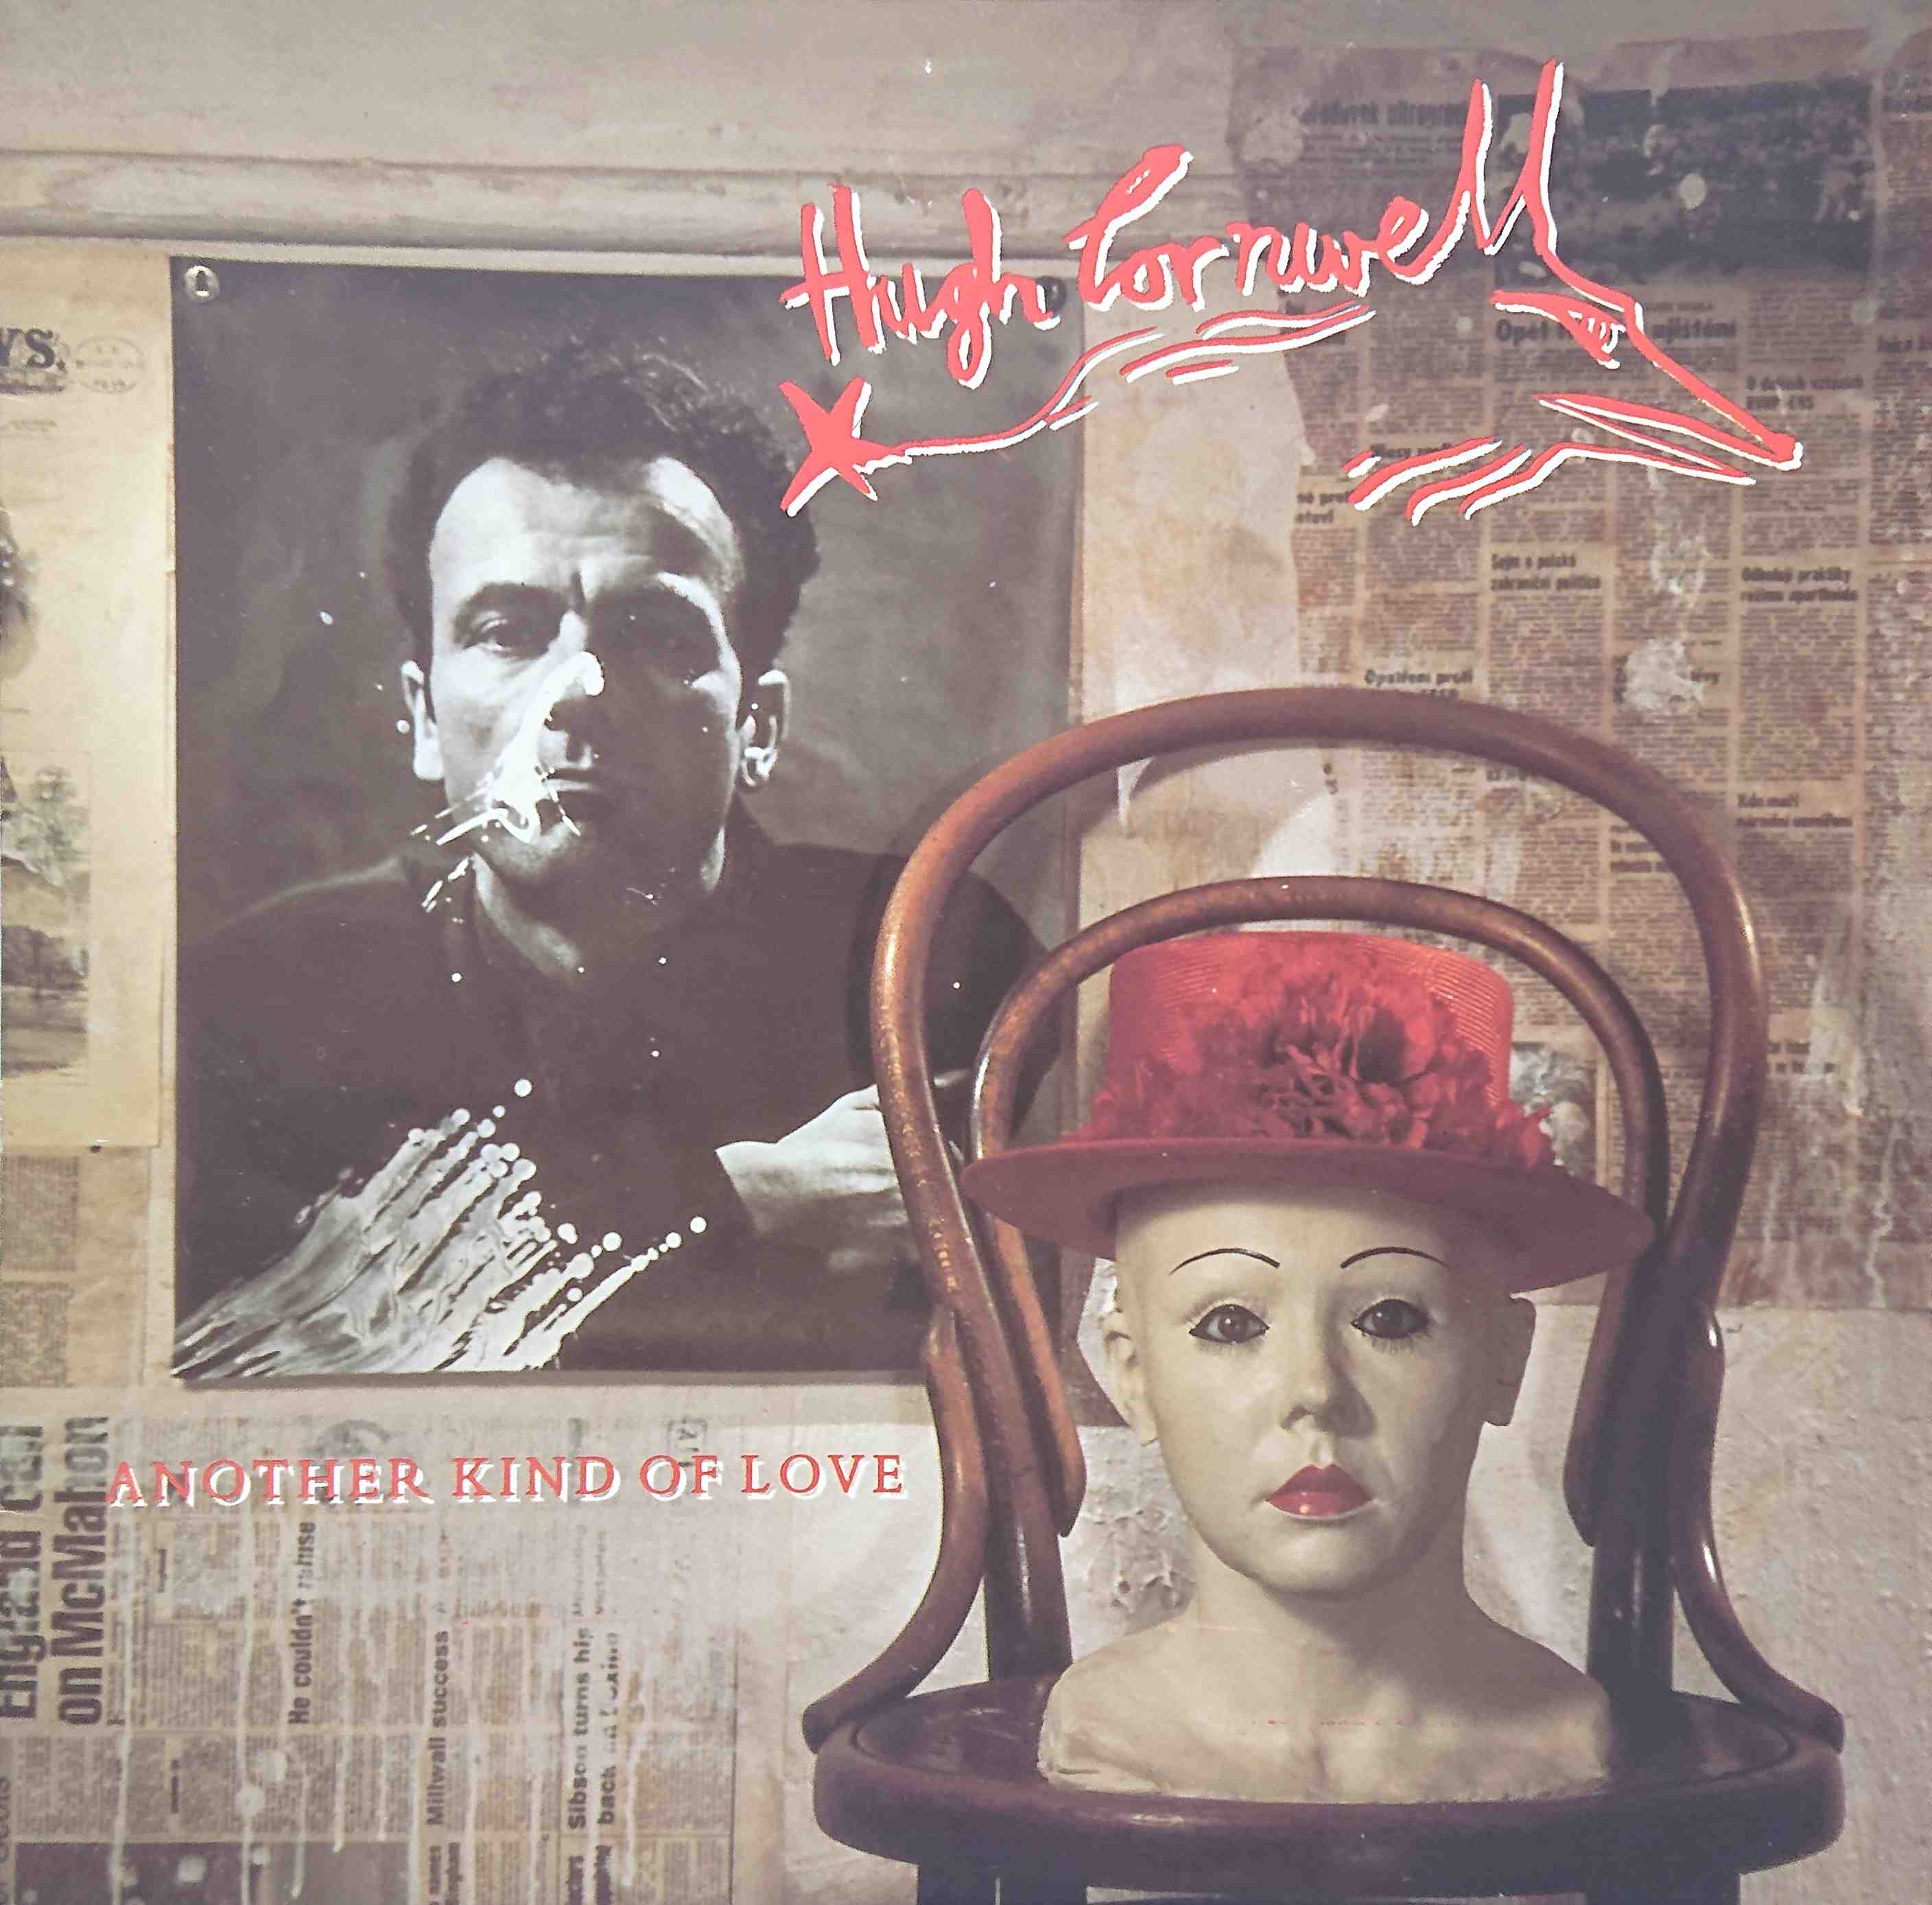 Picture of Another kind of love by artist Hugh Cornwell  from The Stranglers singles